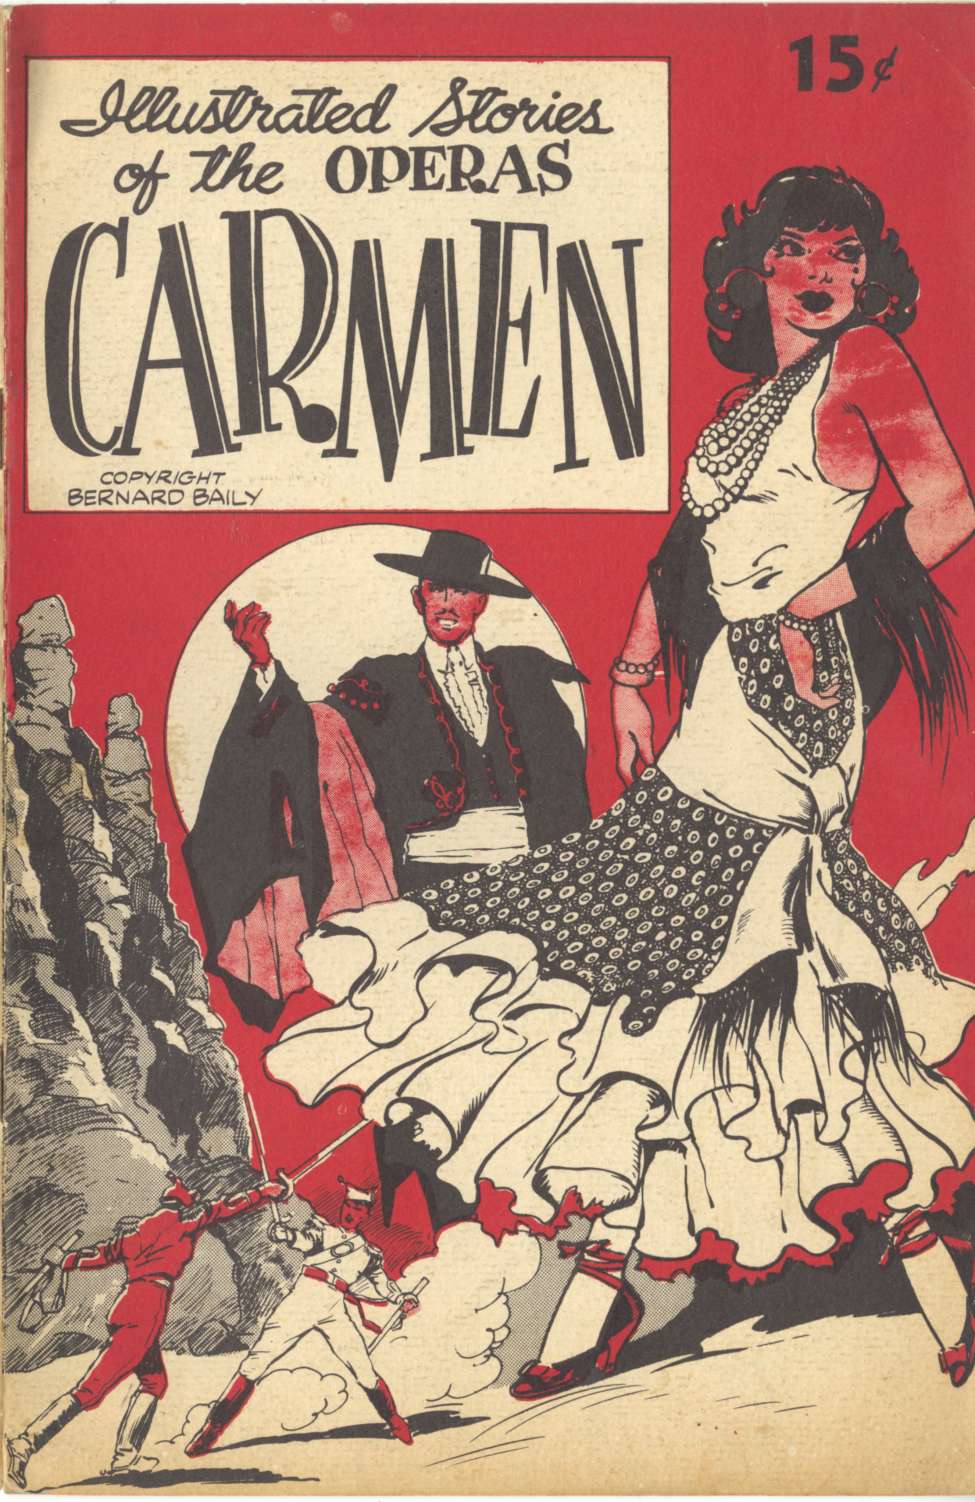 Comic Book Cover For Illustrated Stories of the Operas: Carmen